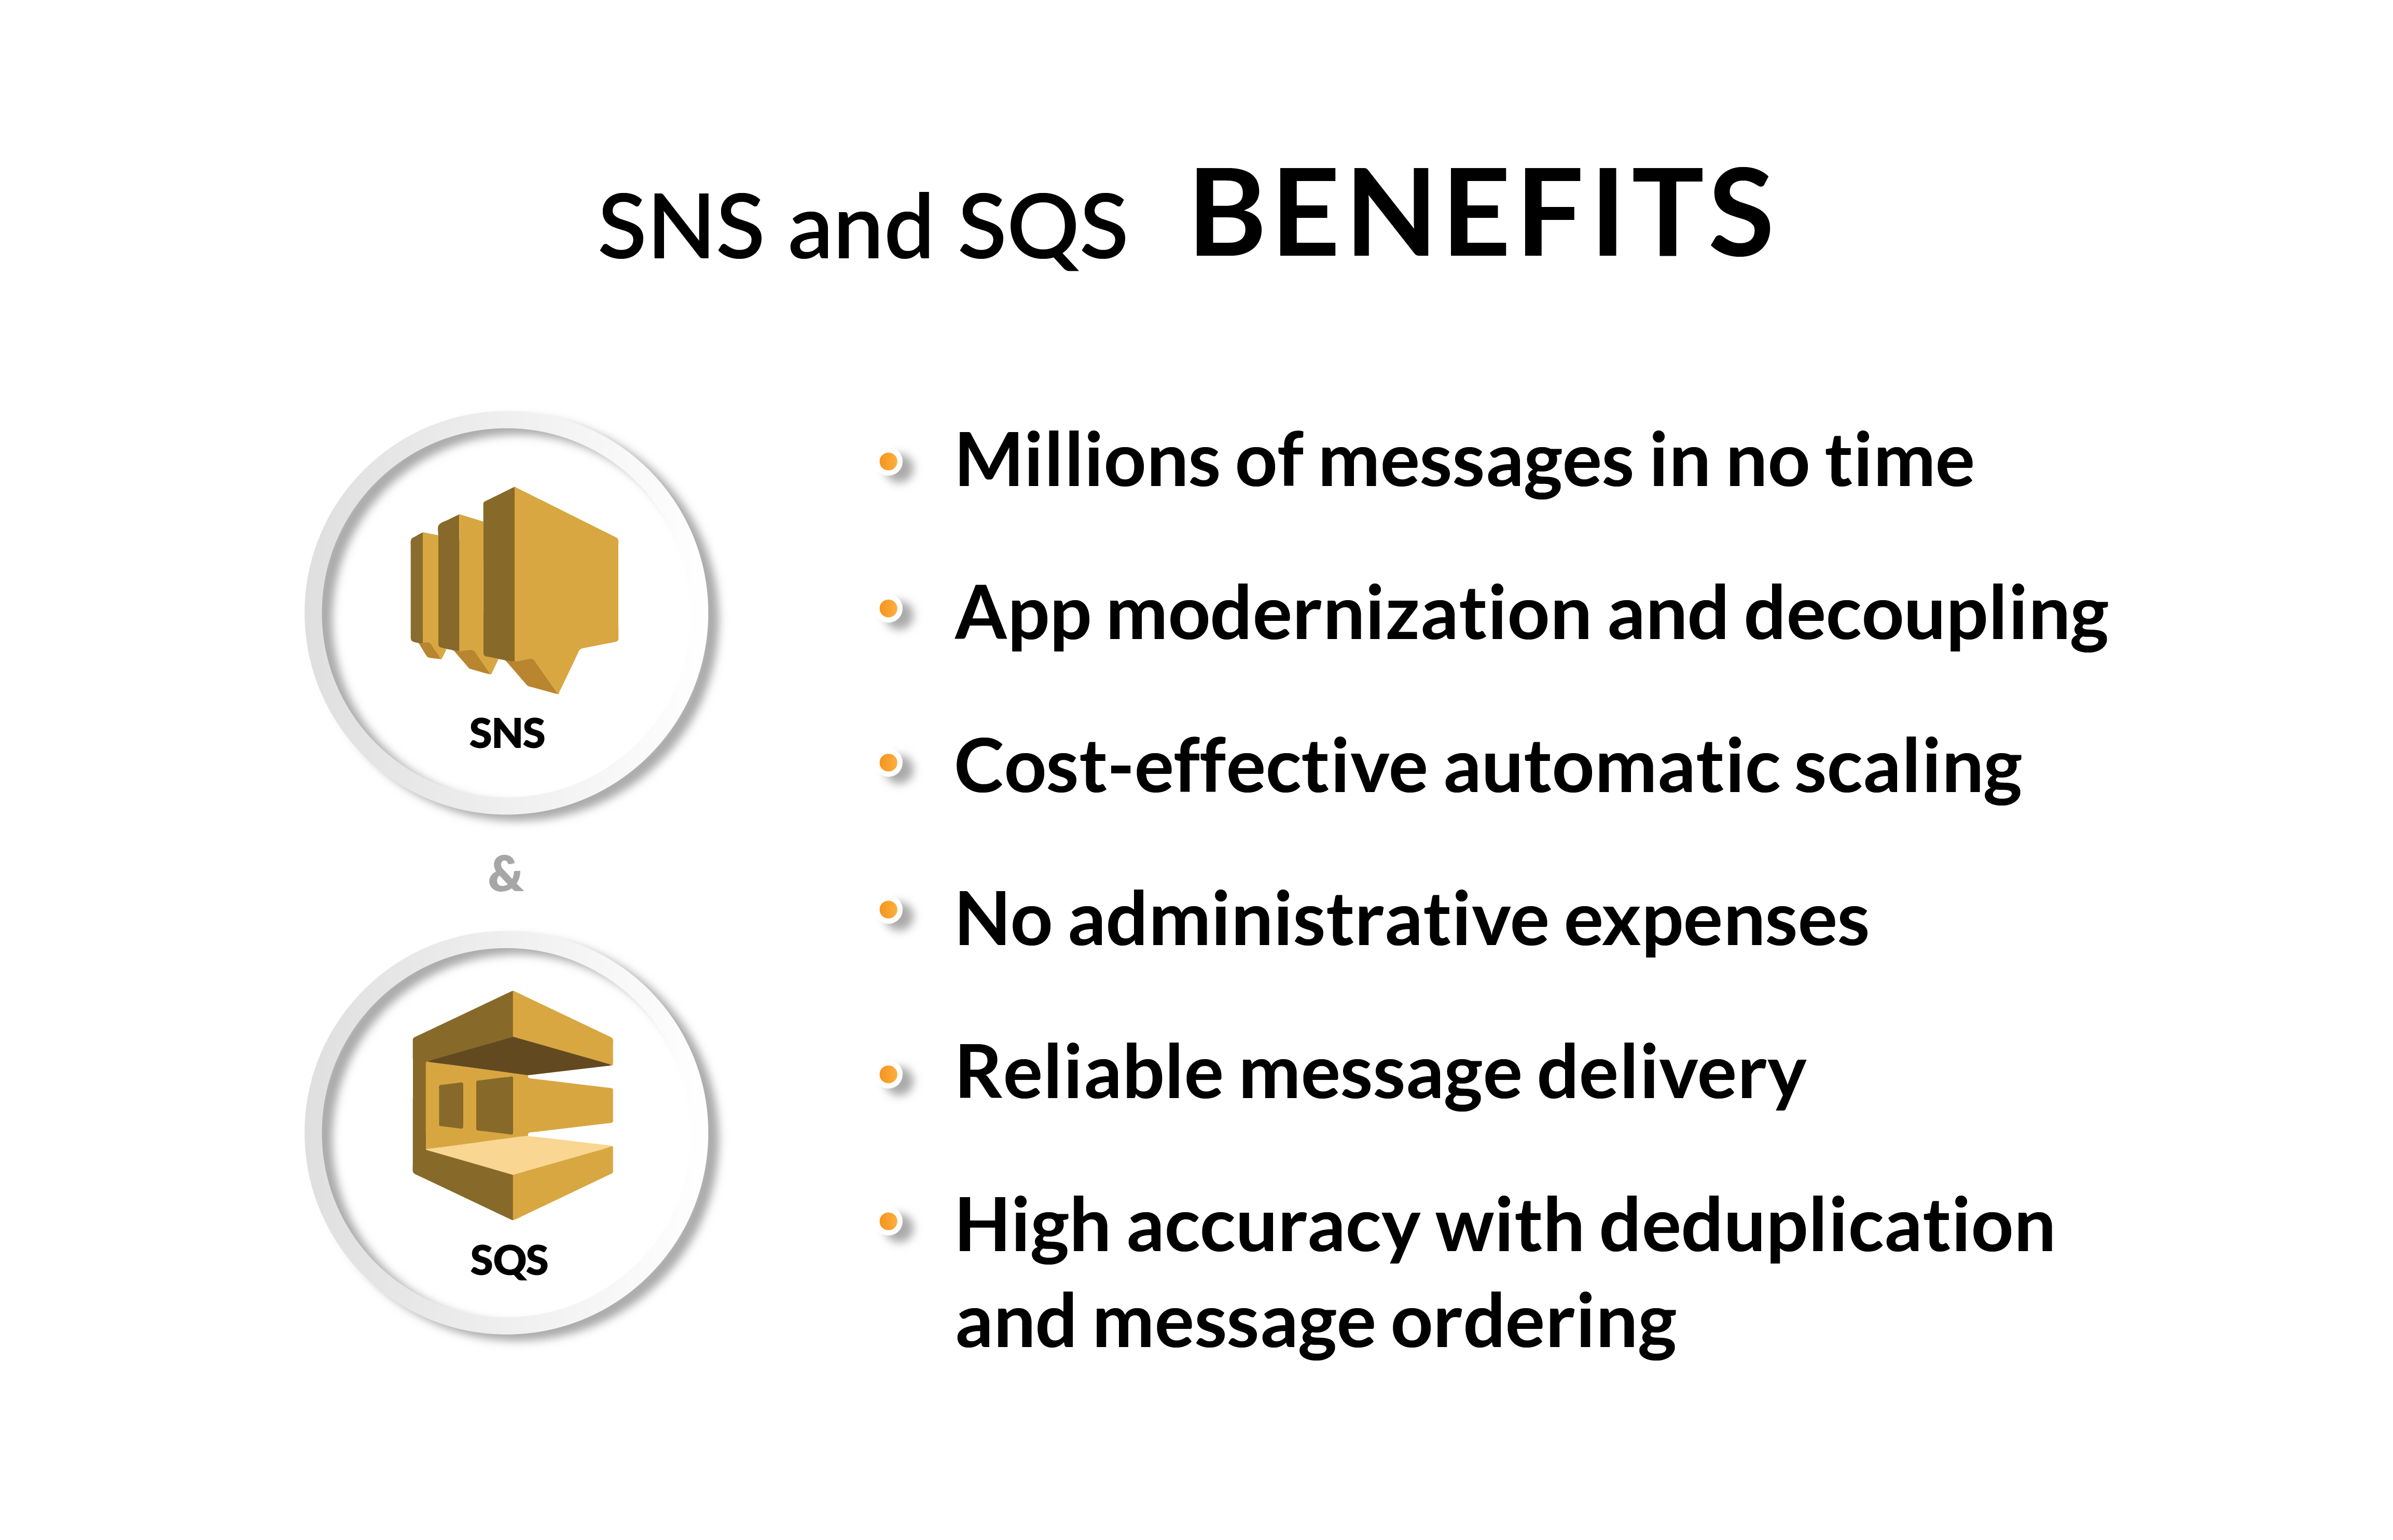 SNS and SQS benefits.jpg